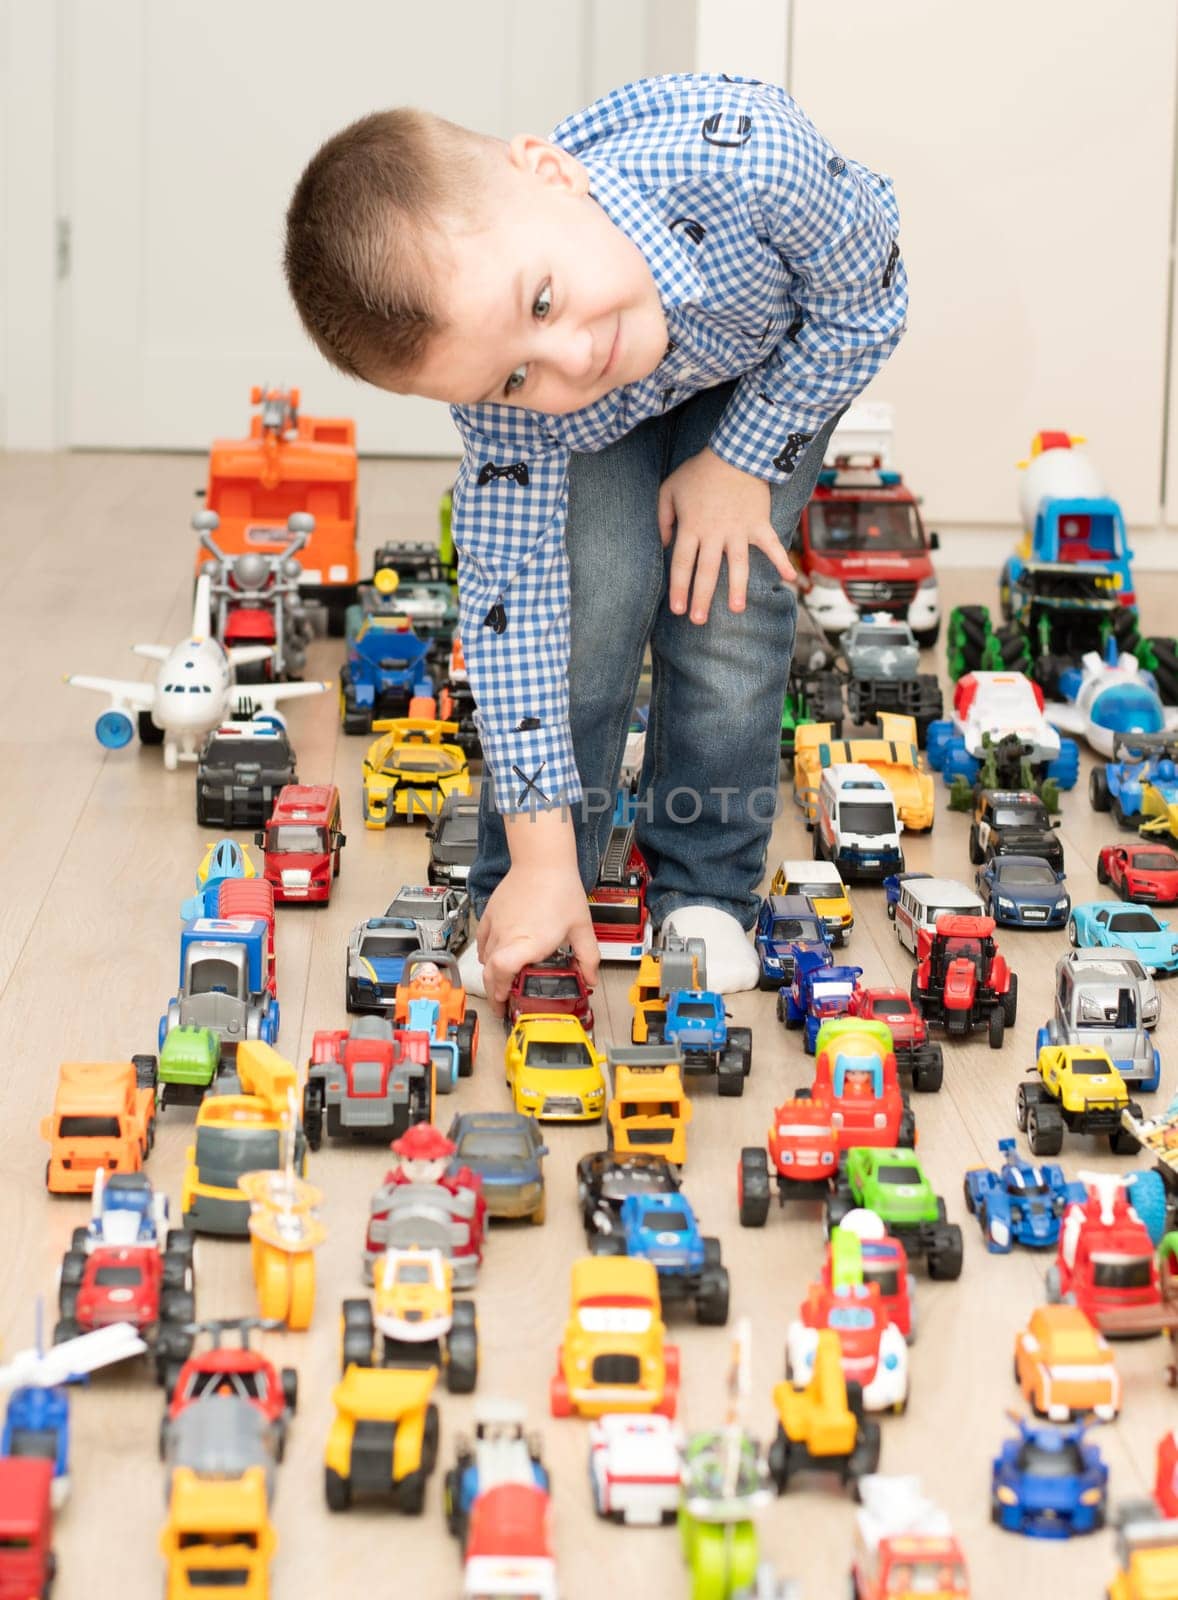 Children. Toy cars. A small cheerful and handsome boy, 4 years old, wearing a checkered shirt, plays with many colorful cars in a home interior. by ketlit